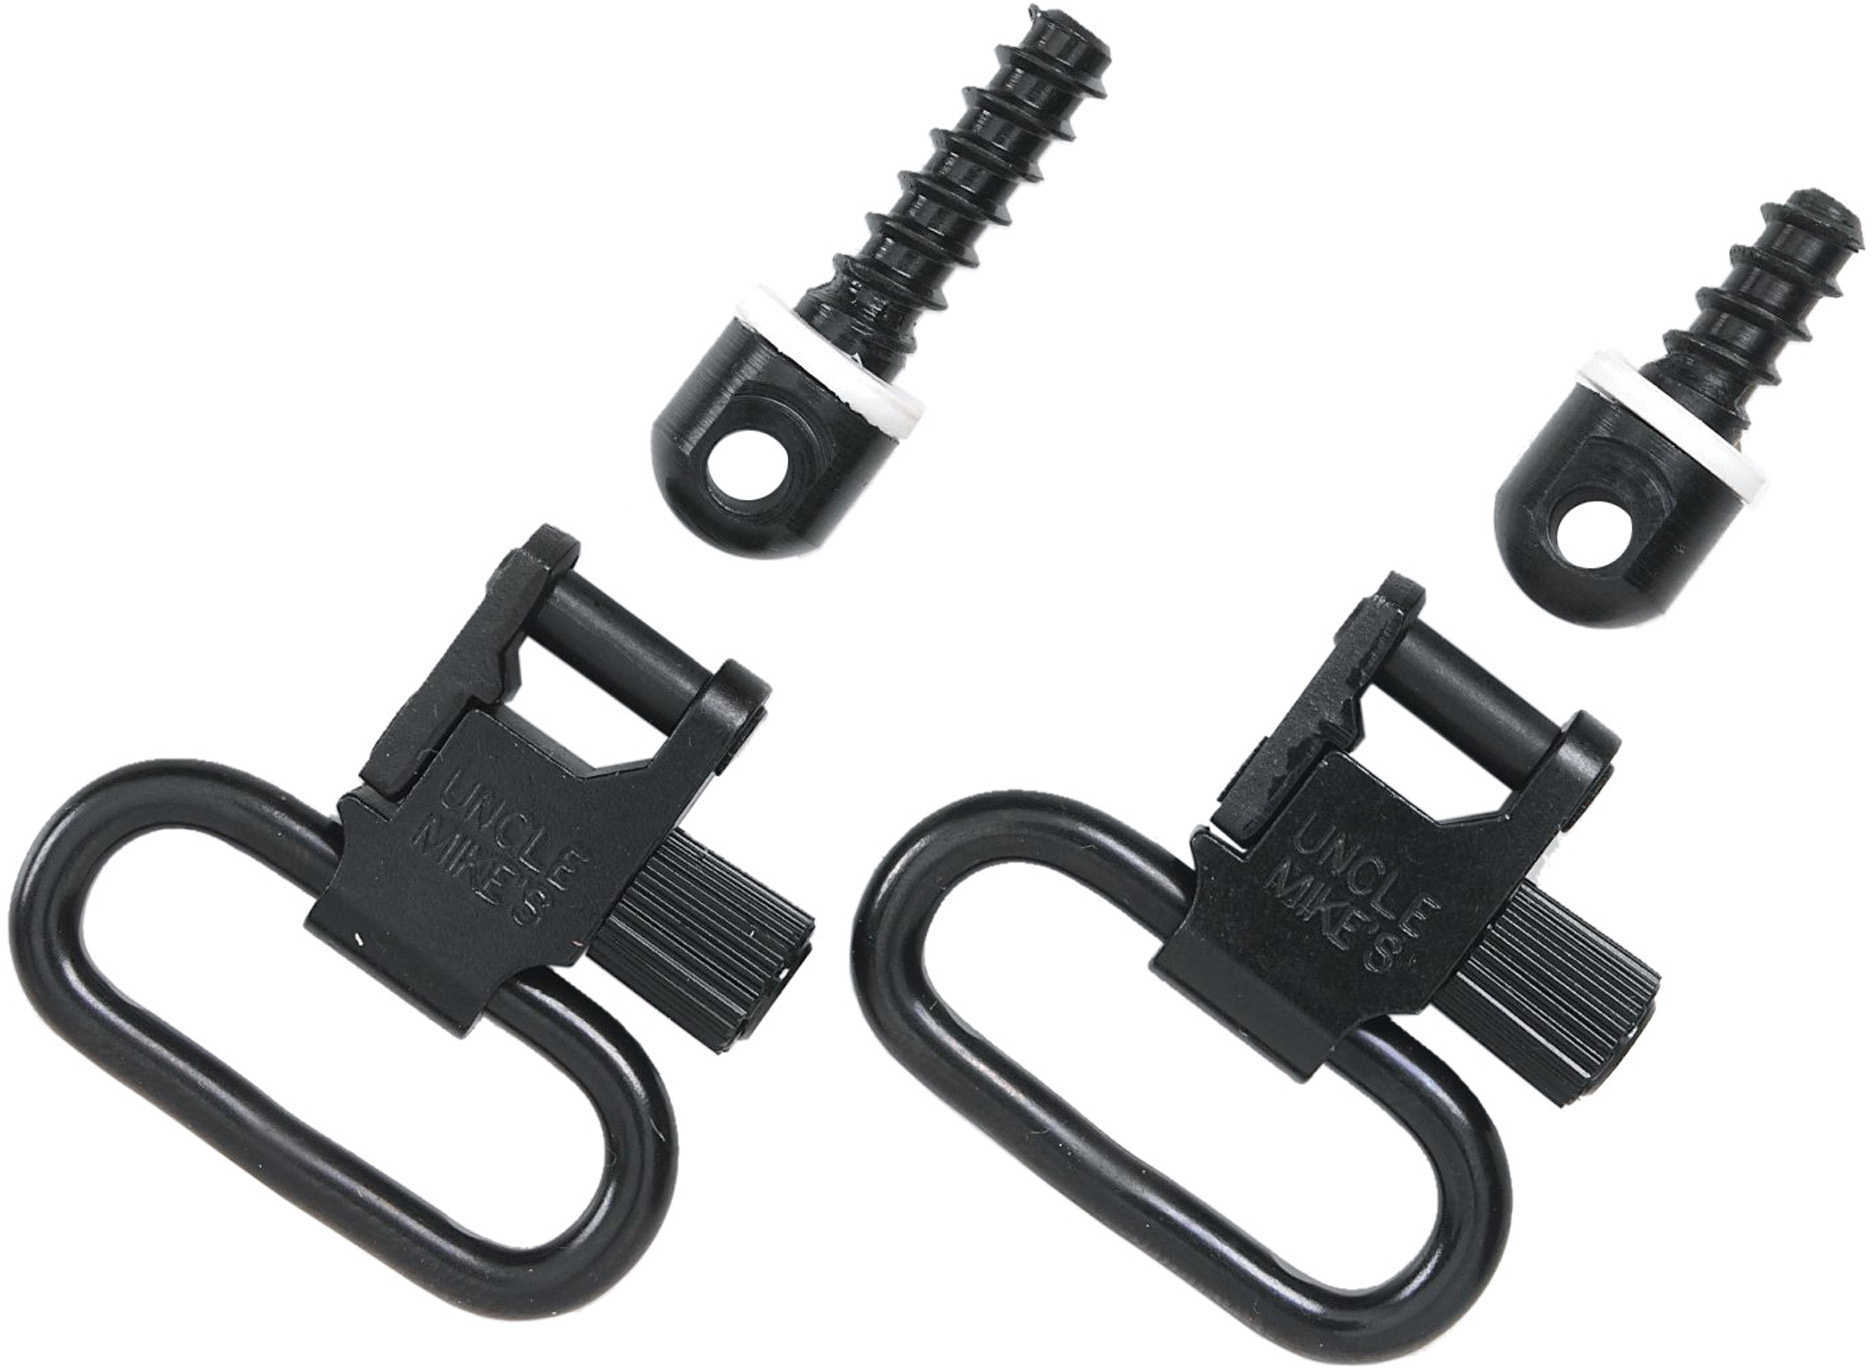 Uncle Mikes 1" Black Quick Detach Sling Swivels For Bolt Action Rifles Md: 13112